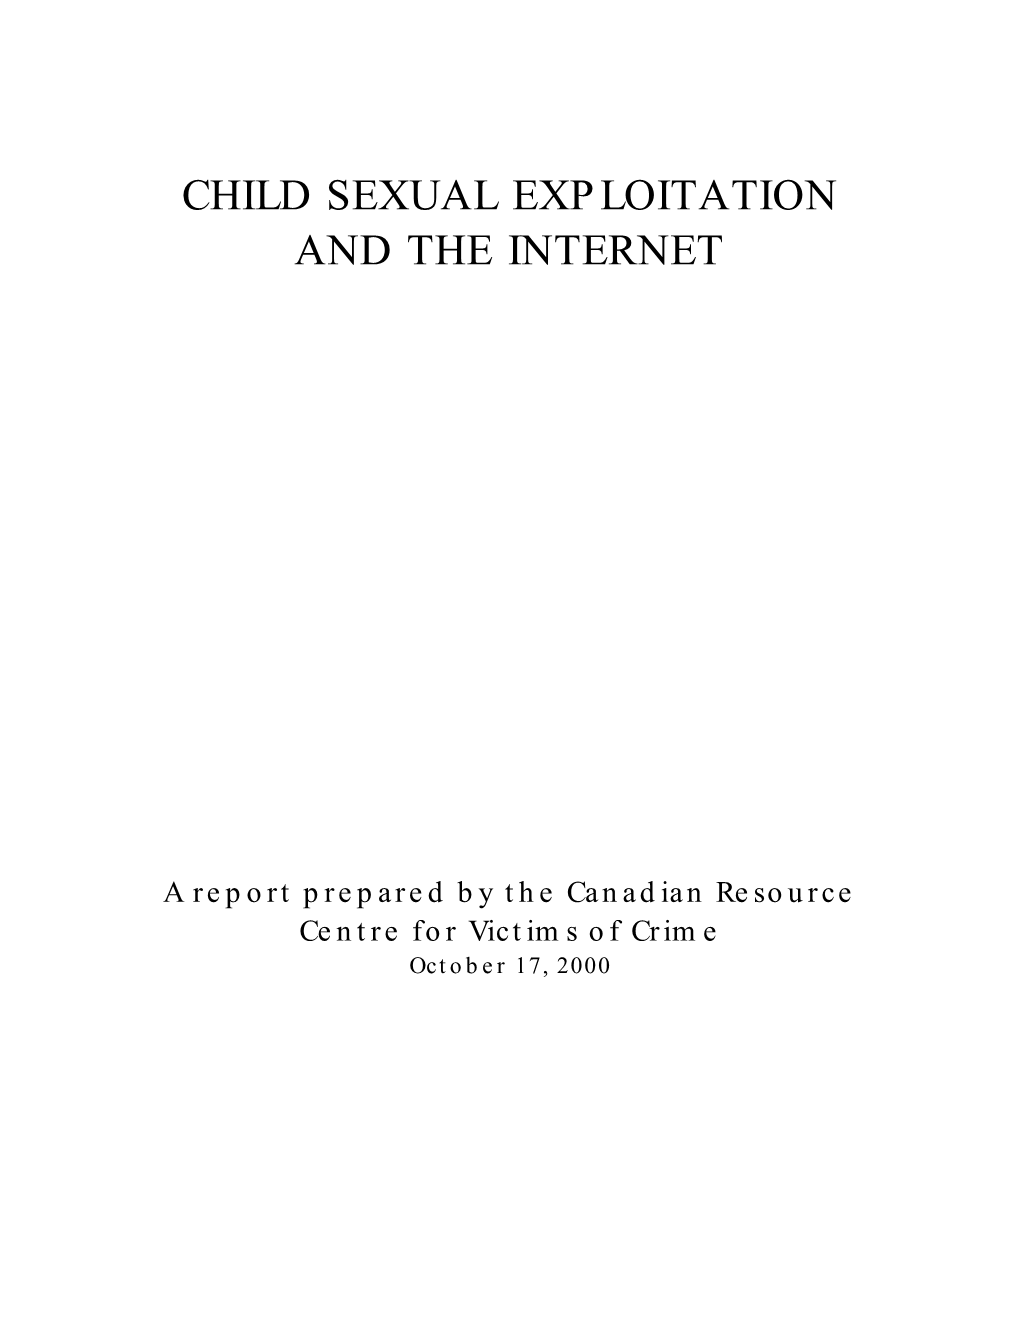 Child Sexual Exploitation and the Internet